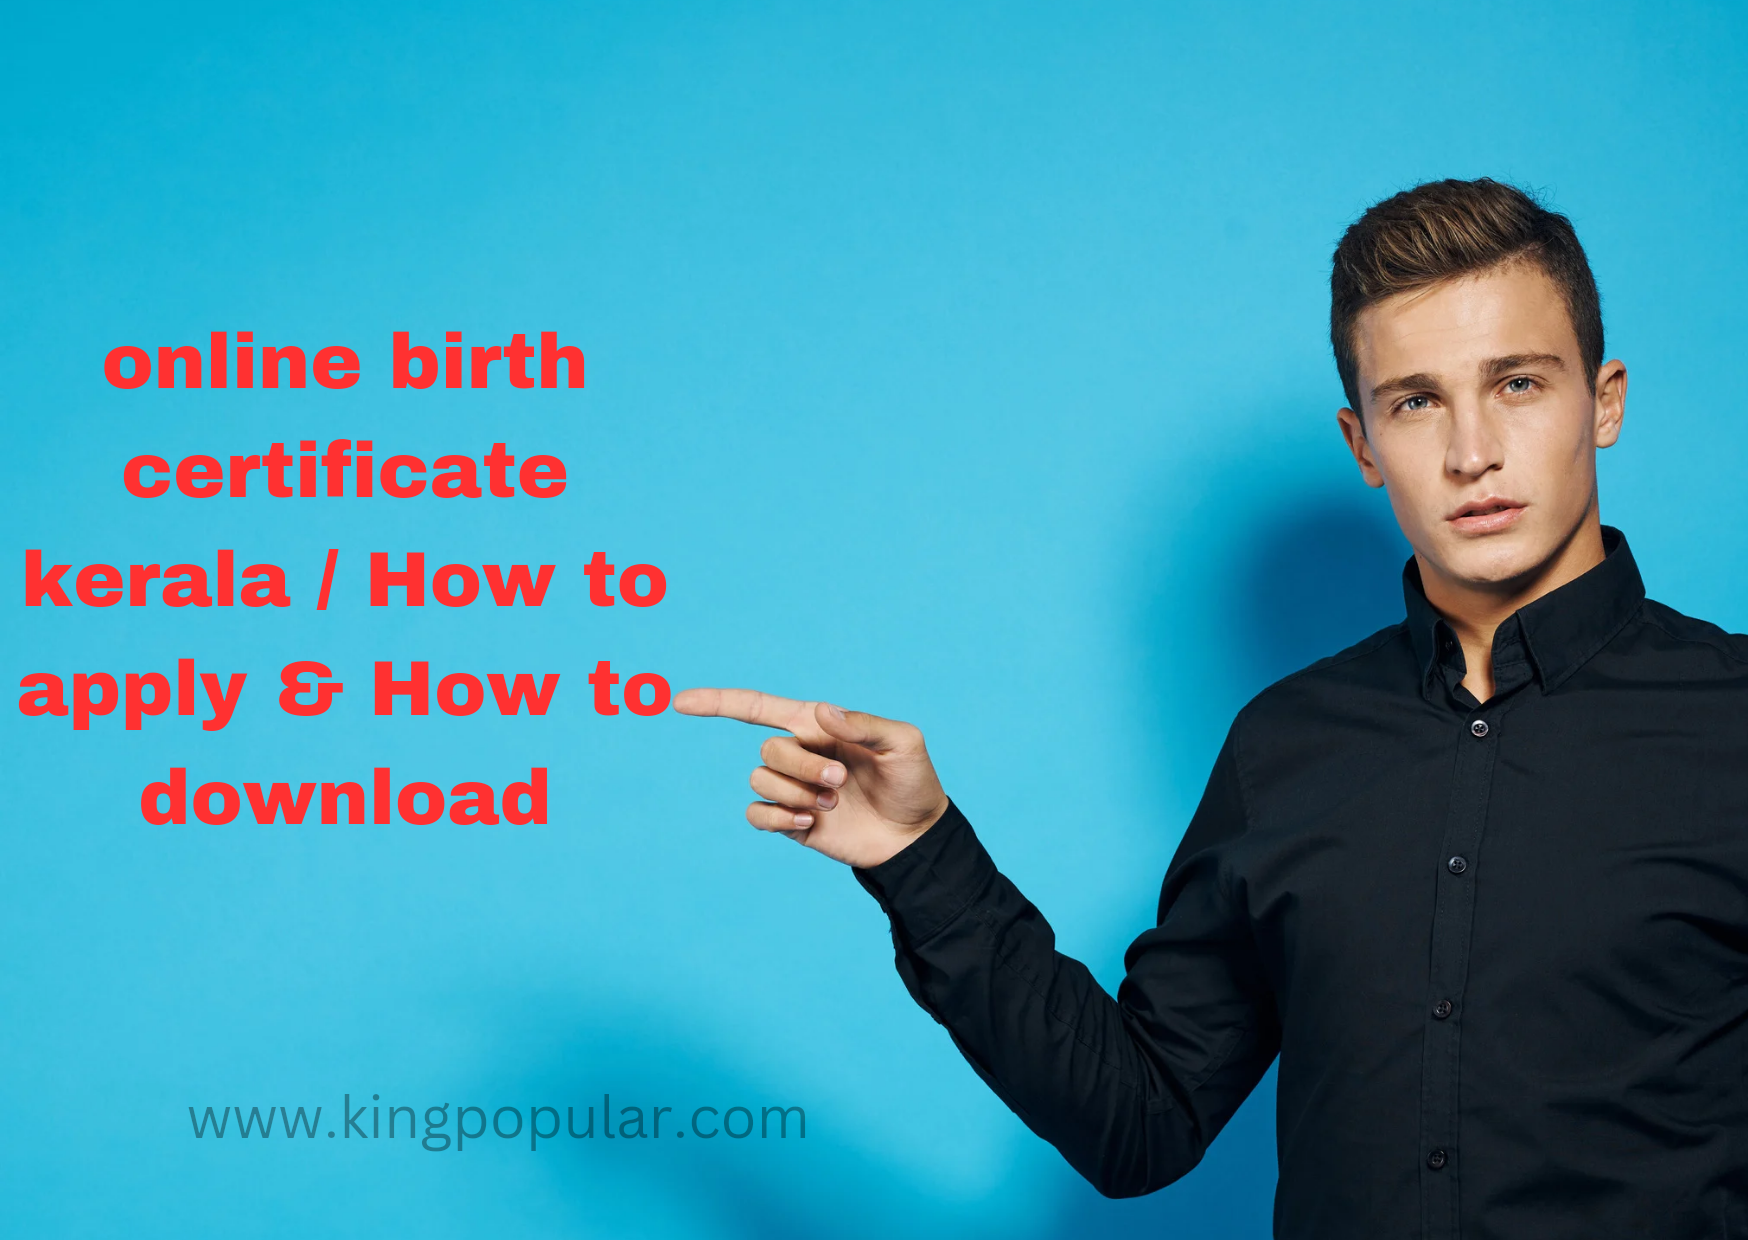 online birth certificate kerala / How to apply & How to download